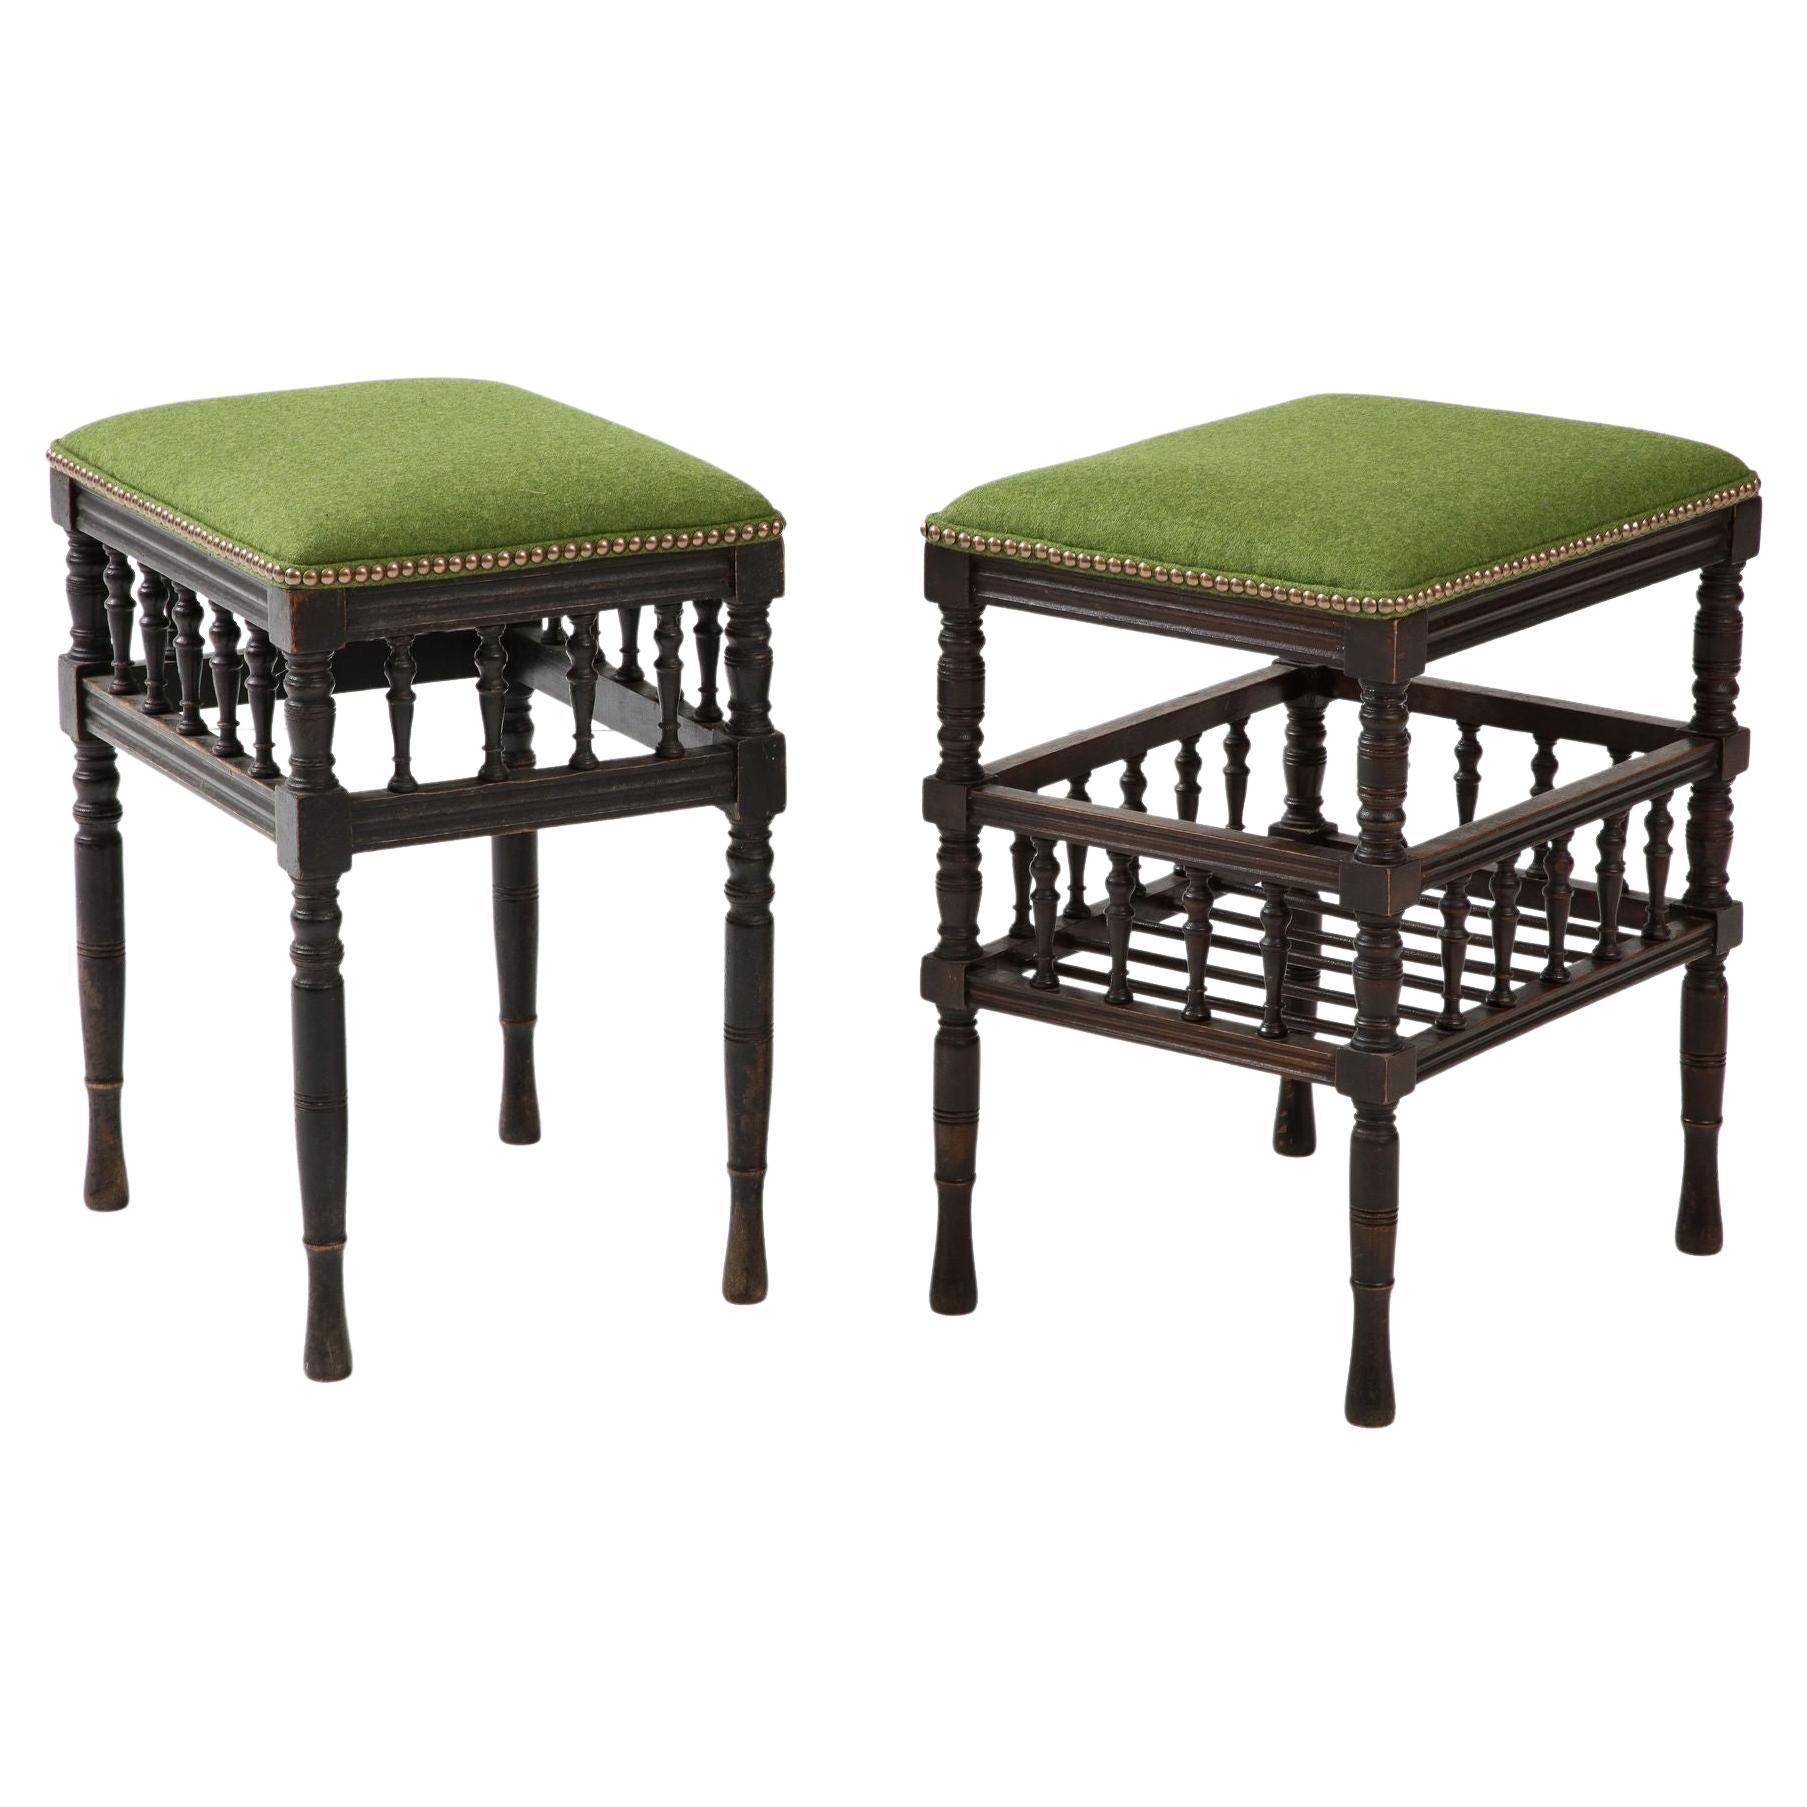 Scottish Wool Upholstered Stools For Sale